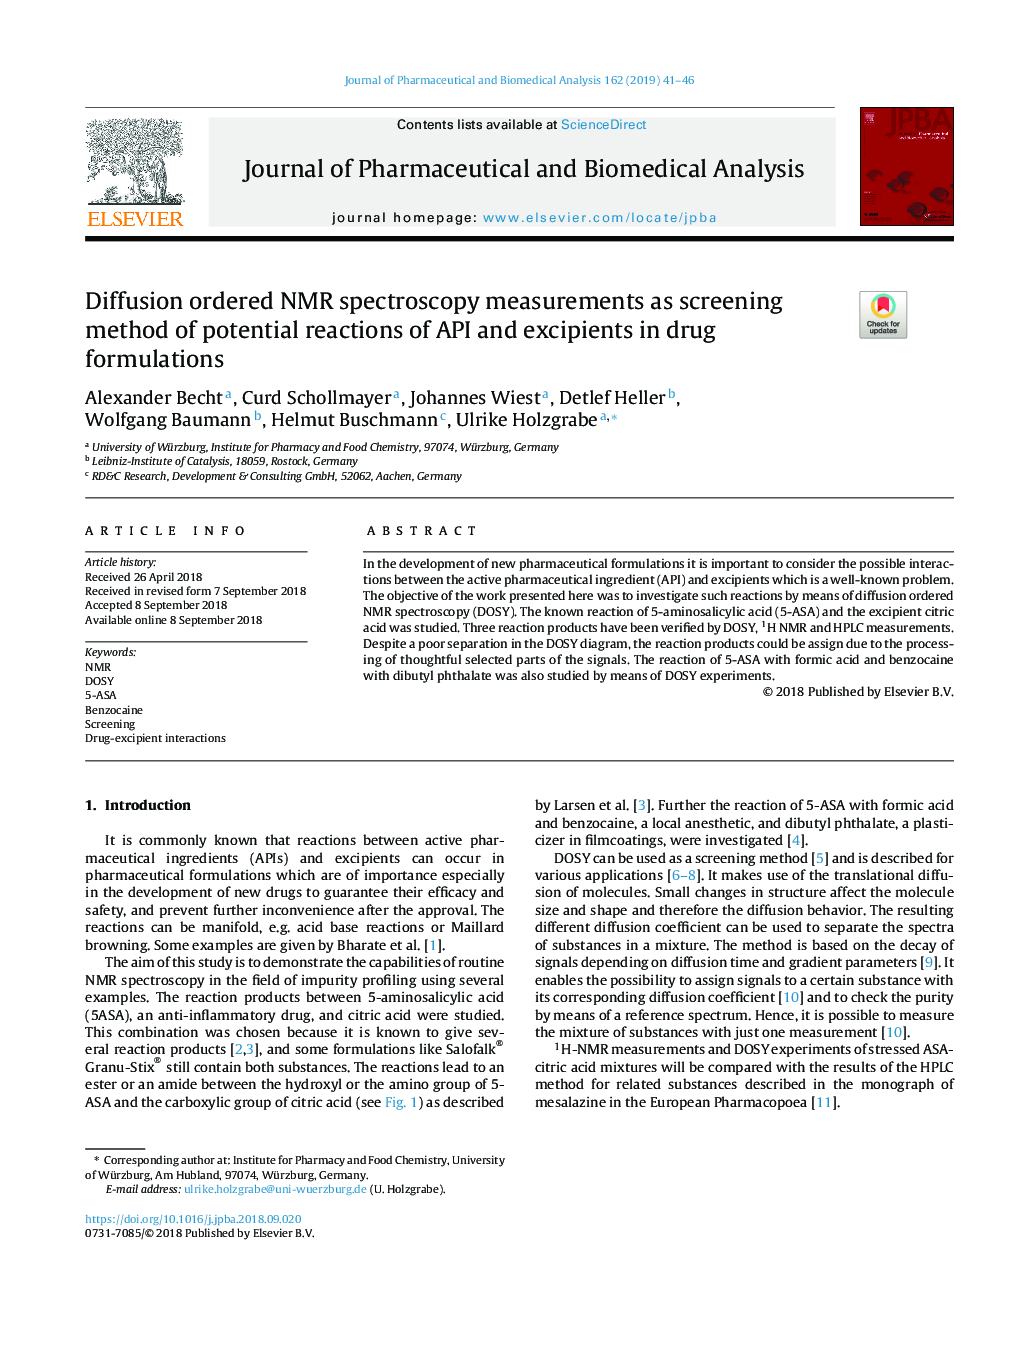 Diffusion ordered NMR spectroscopy measurements as screening method of potential reactions of API and excipients in drug formulations